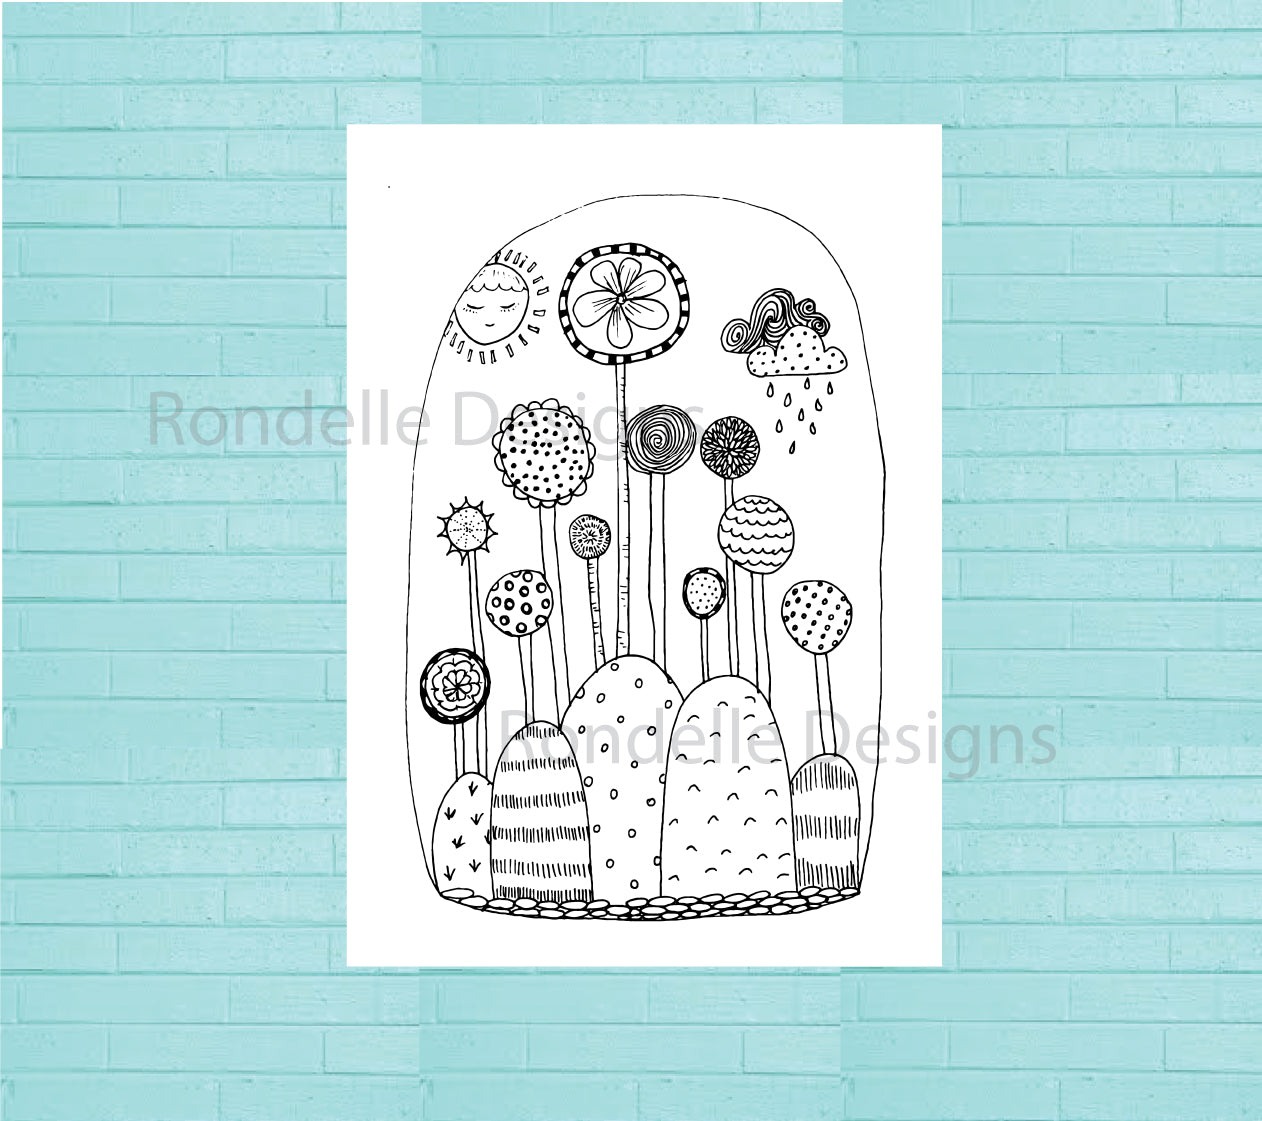 Colouring In Poster / Instant Digital Download A1 Printable Poster / Lollipop Land